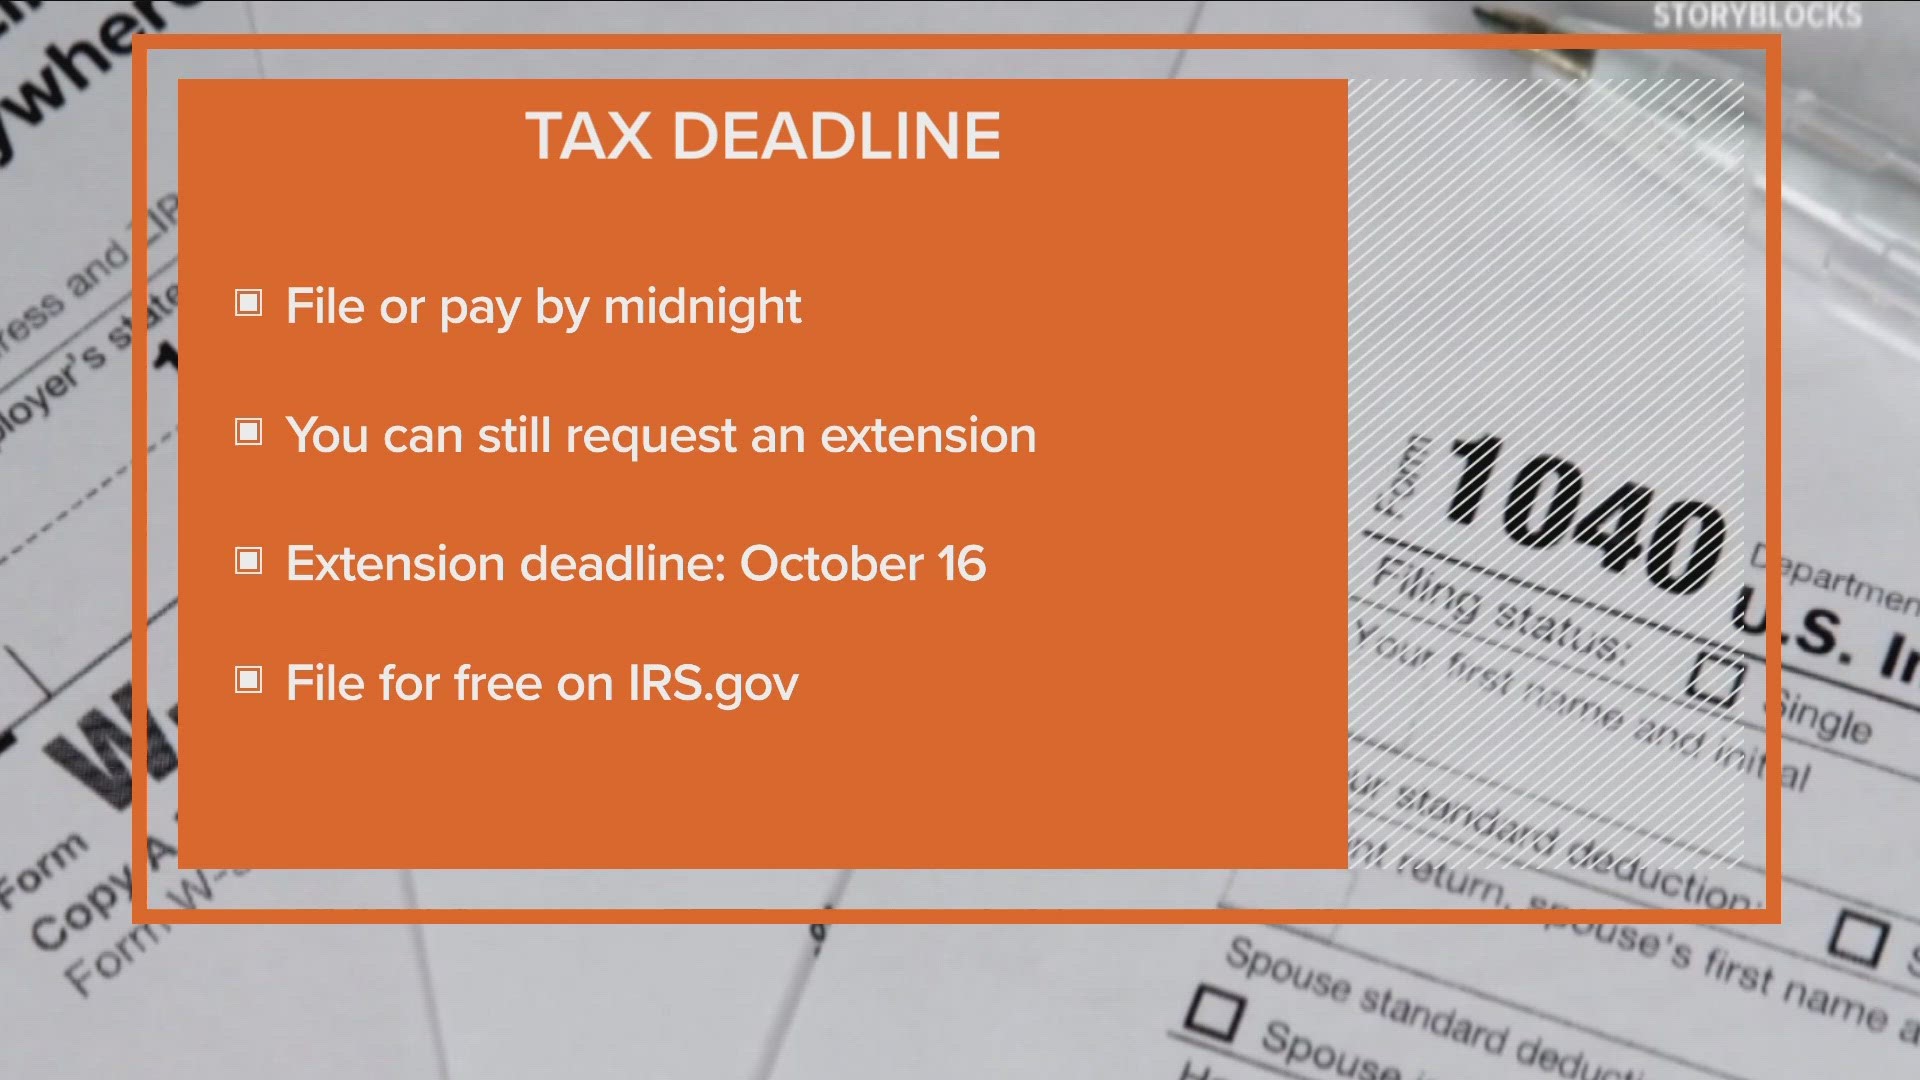 The deadline to file your taxes is midnight on Tuesday.